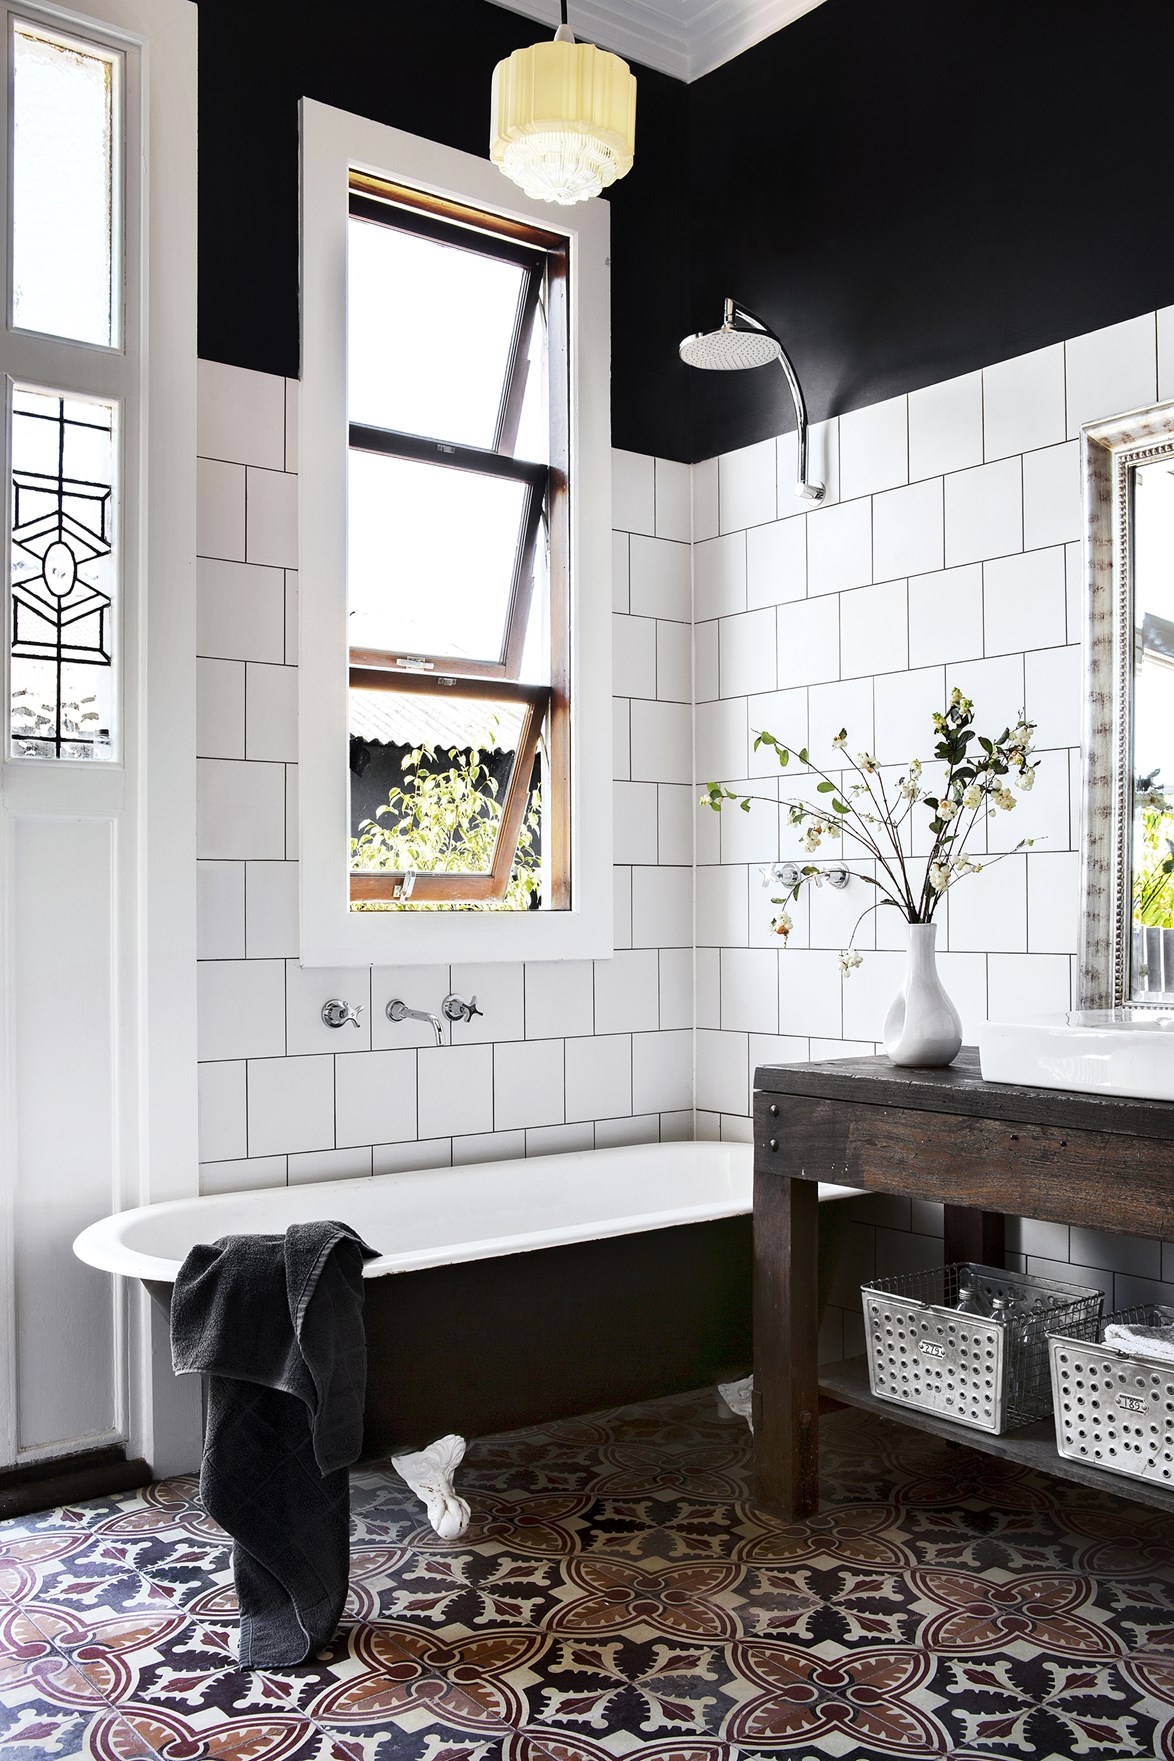 You could be forgiven for thinking that this is a restored bathroom in a heritage home, but it's actually a [new build created from recycled and re-purposed materials](https://www.homestolove.com.au/gallery-carla-and-bens-art-deco-style-new-house-1798|target="_blank"). A mix of modern and vintage pieces give the home it's country meets art-deco flair.